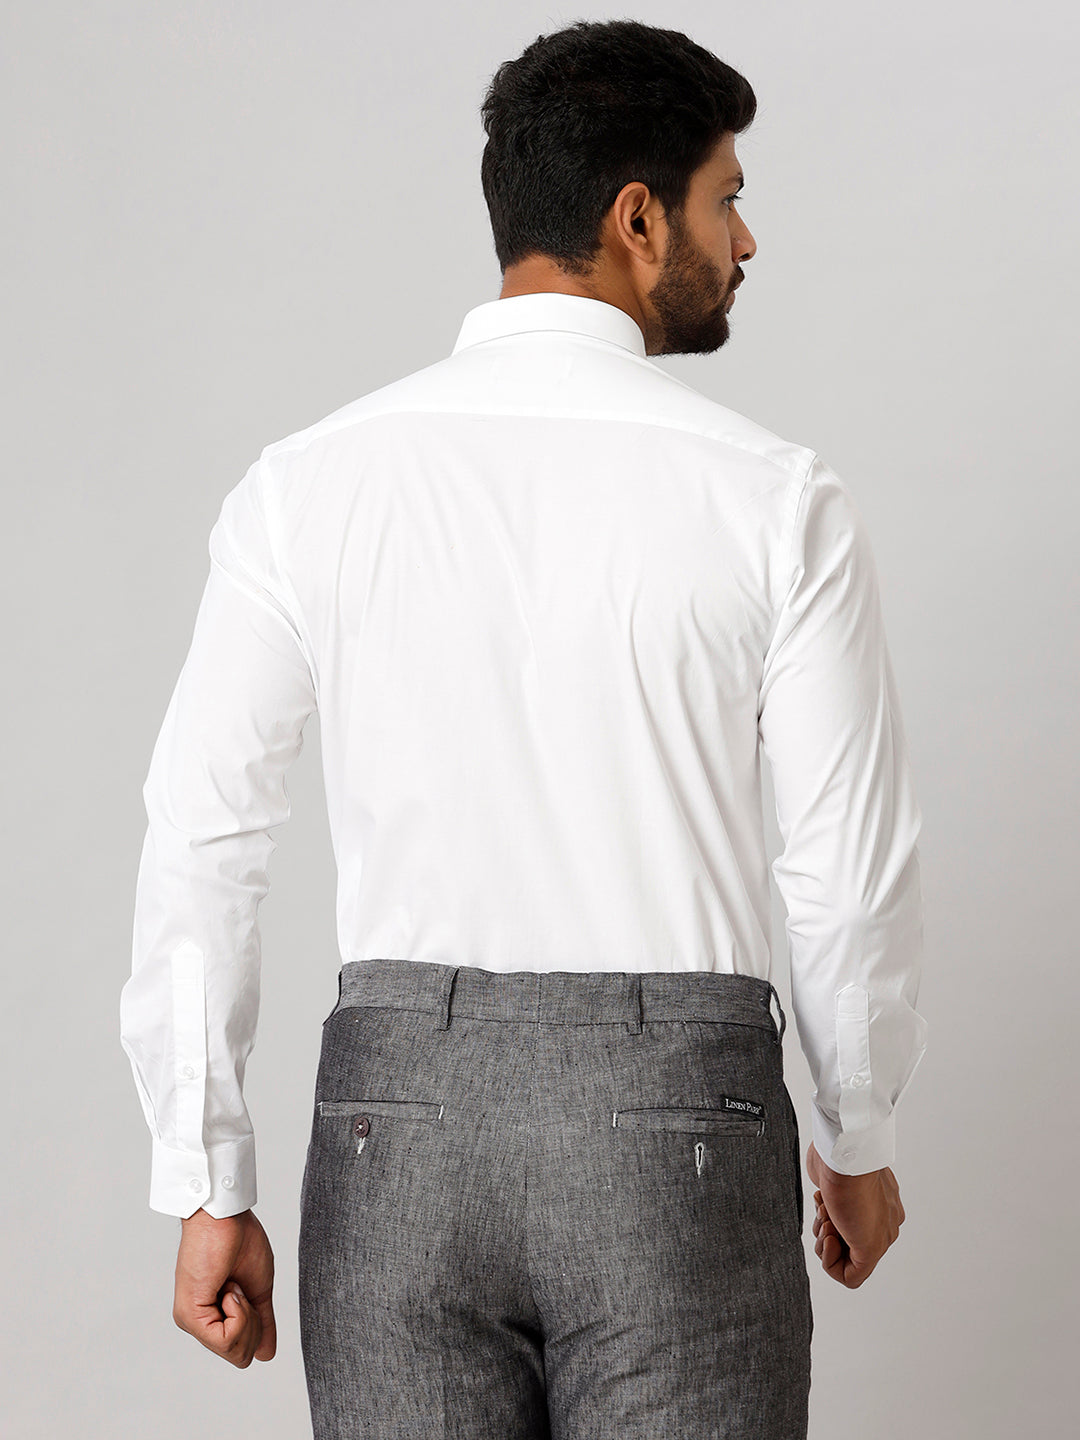 Mens 100% Cotton White Shirt Victory-Back view one